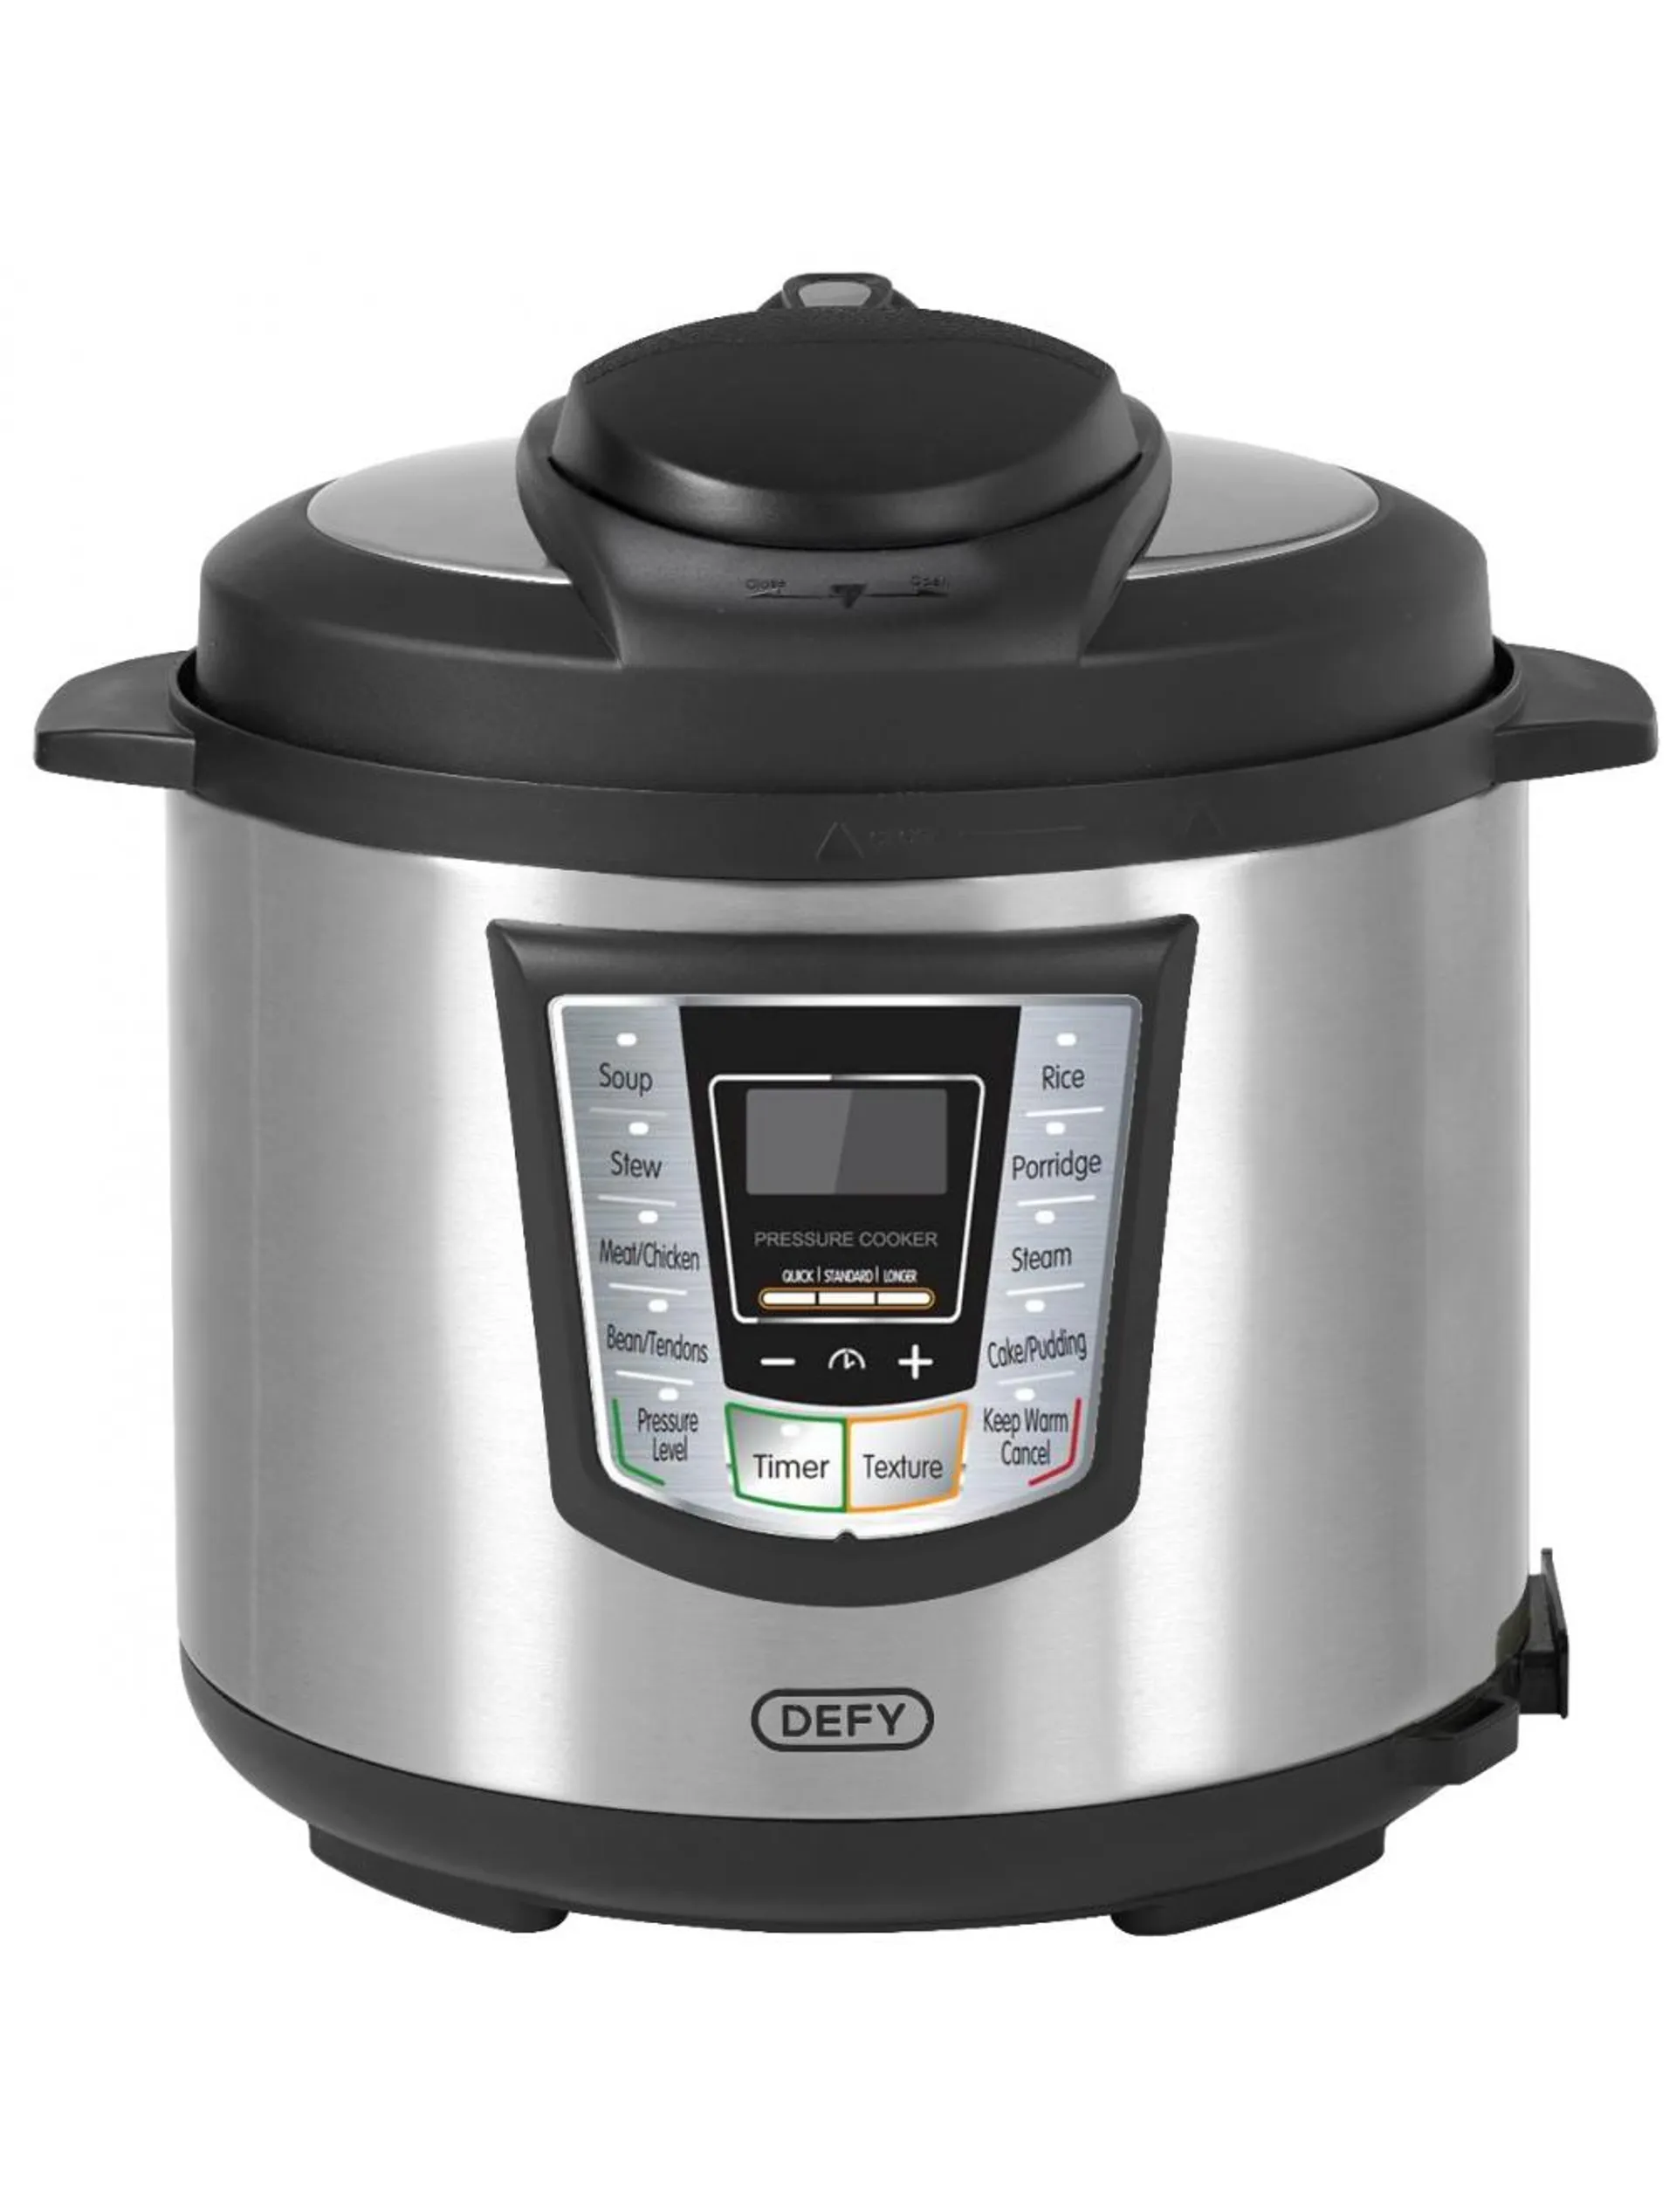 Defy 6lt Electronic Pressure Cooker Pc600s